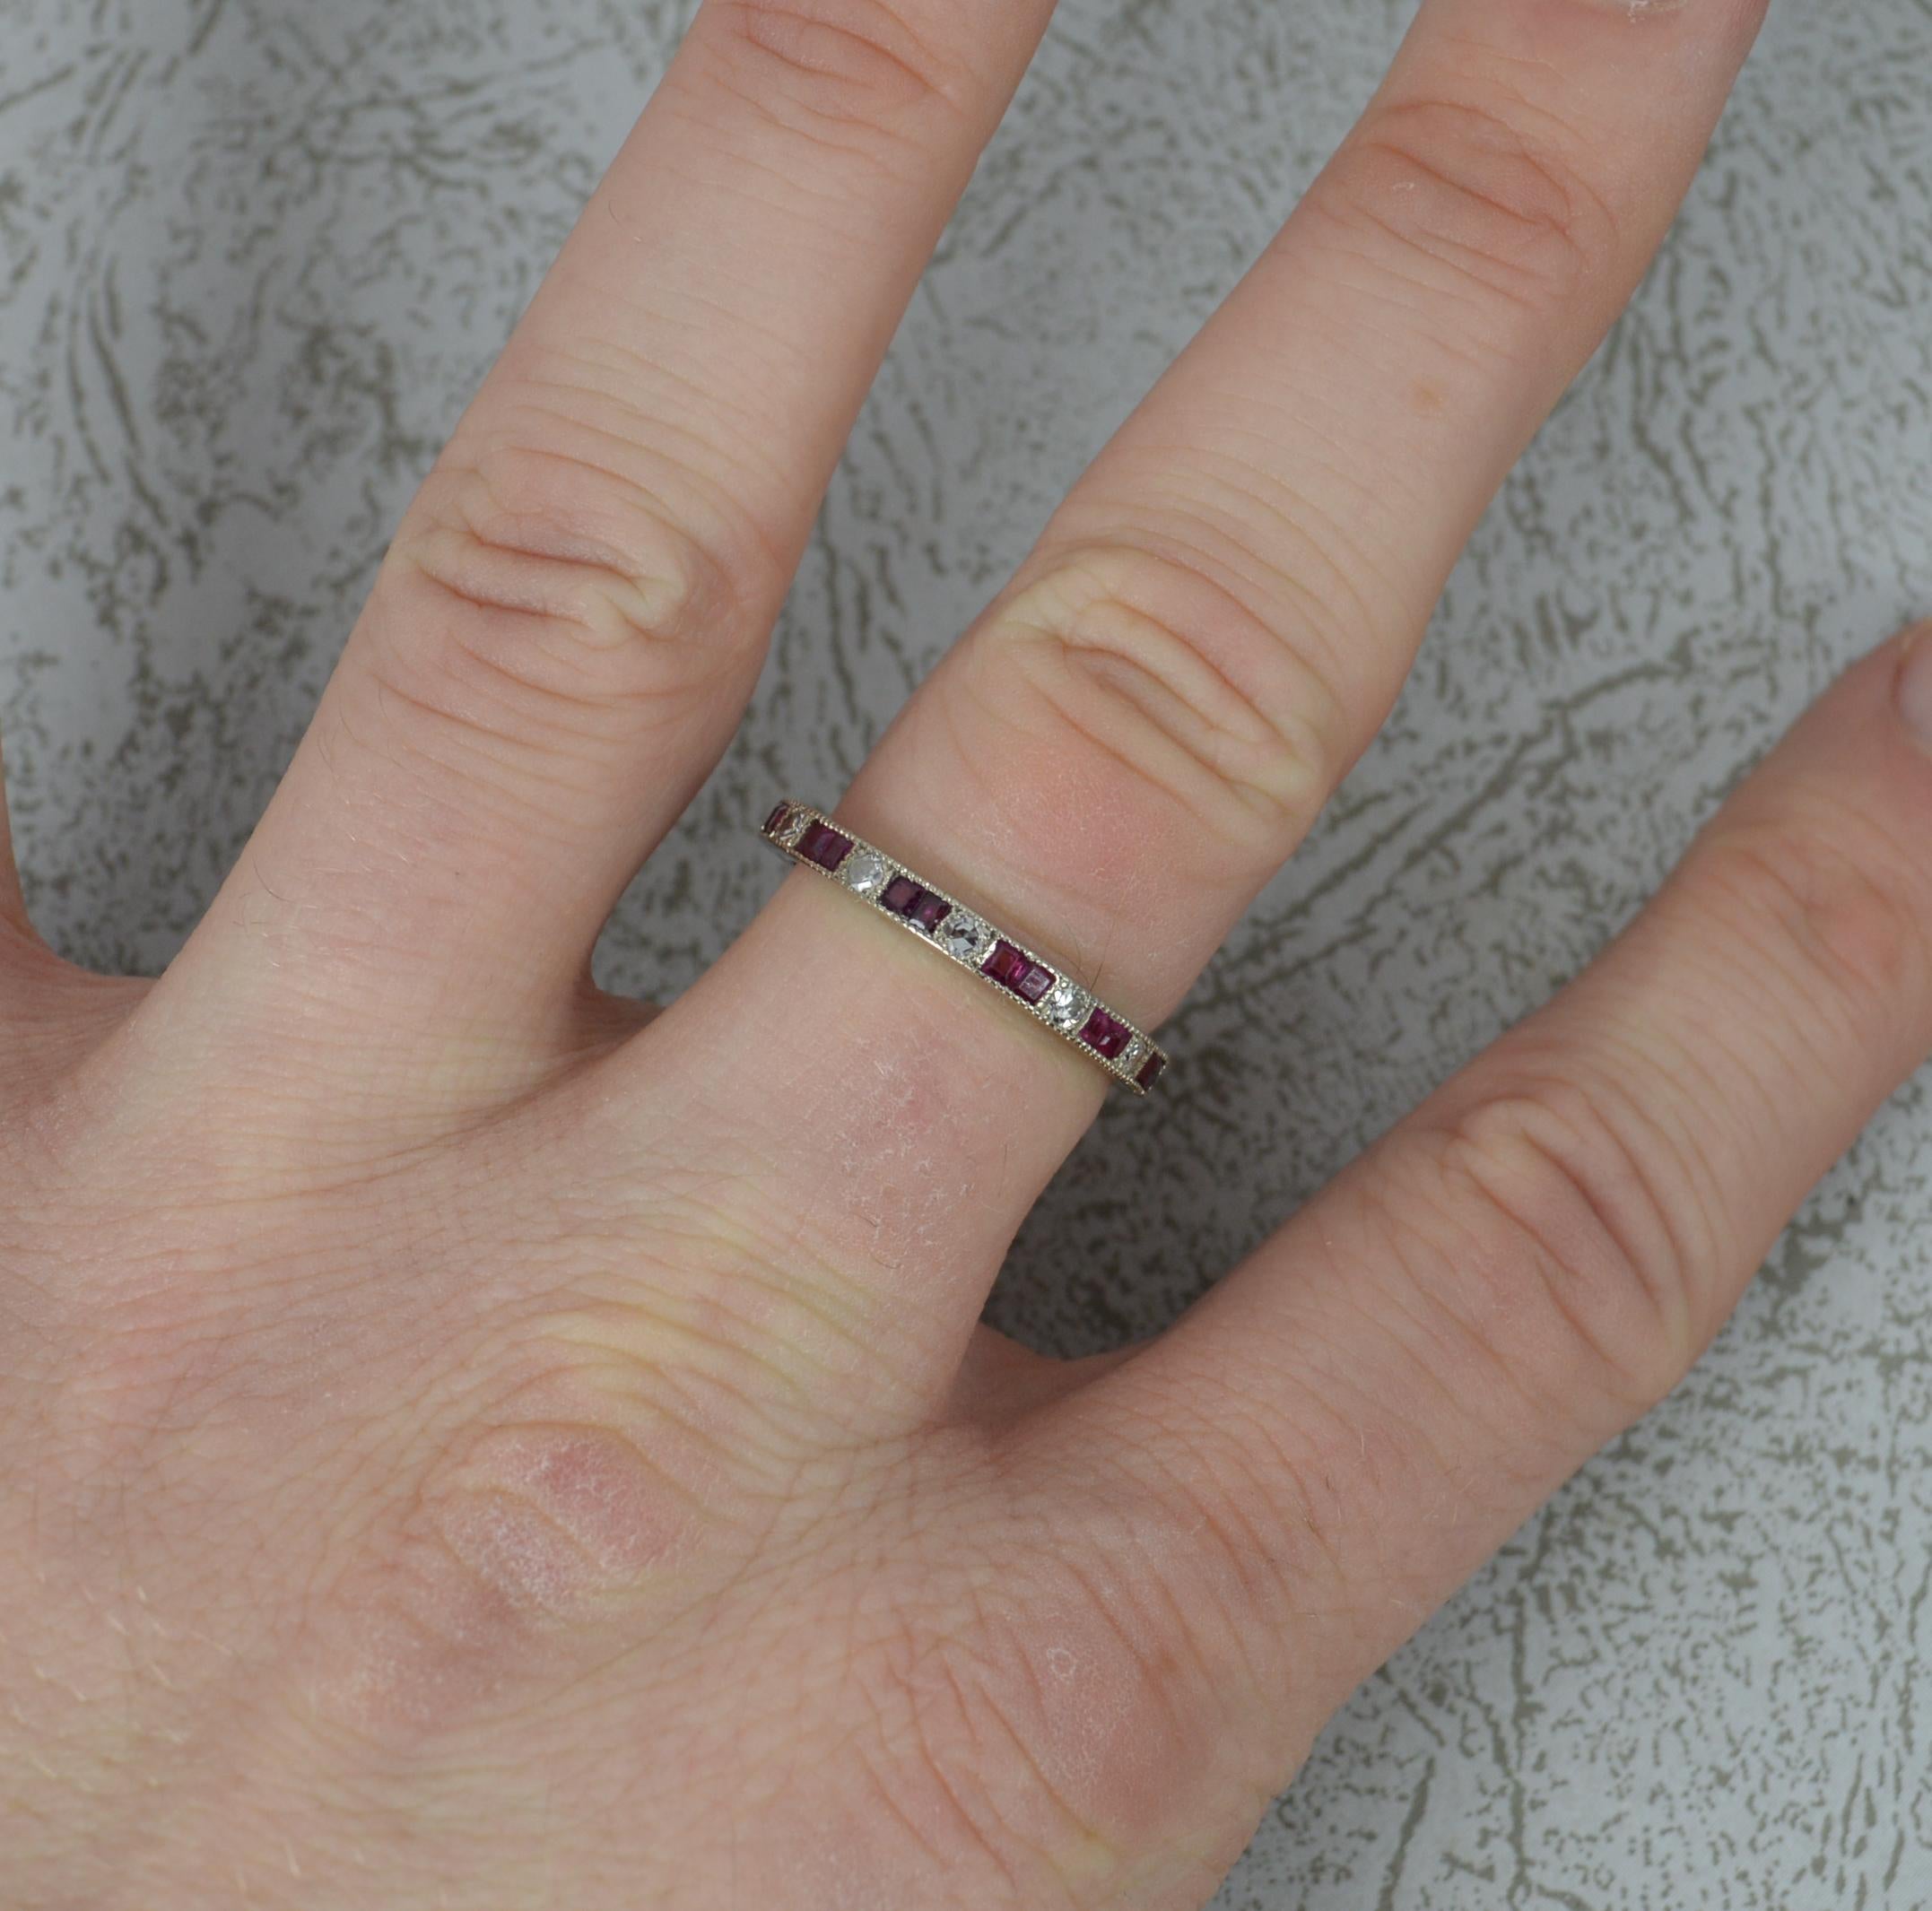 Platinum, Ruby and Diamond ladies full eternity stack ring. c1920.
Solid platinum example throughout. 2.5mm wide, 2.0mm off the finger,
Set with alternating pairs of princess cut ruby stones and round cut diamonds in fine grain settings.

Condition;